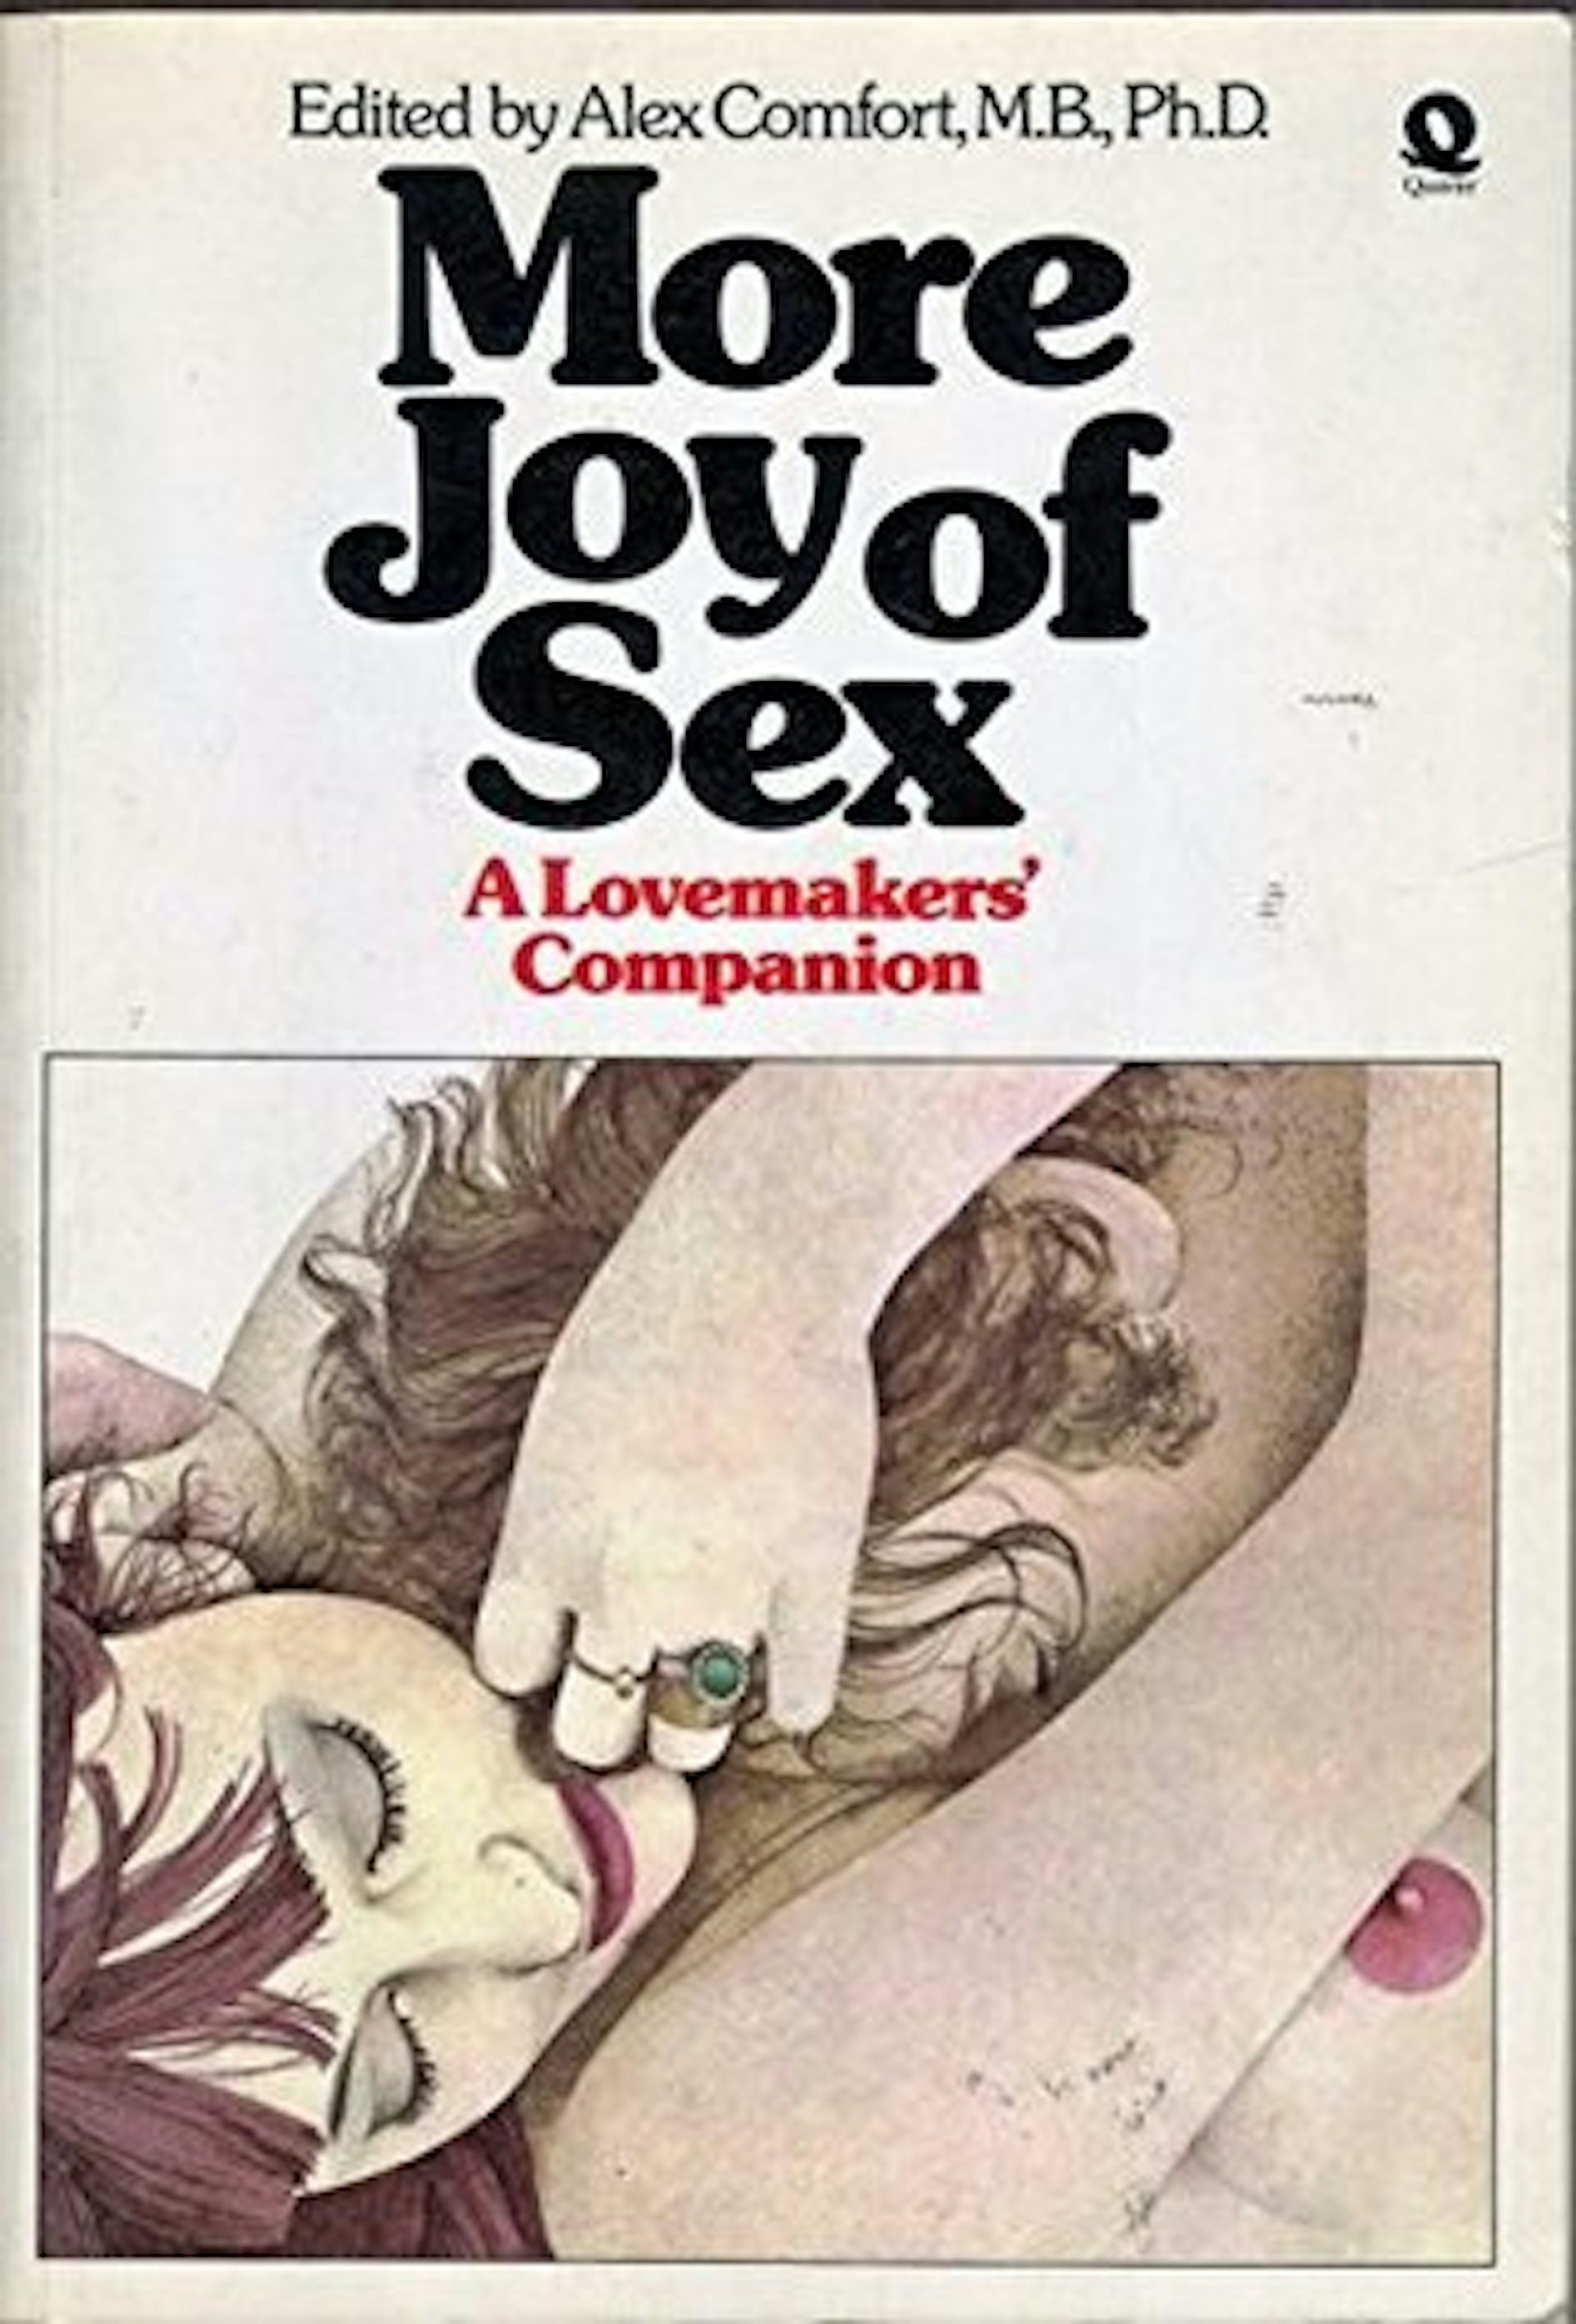 50 years on, The Joy of Sex is outdated in parts but still a fun unanxious romp